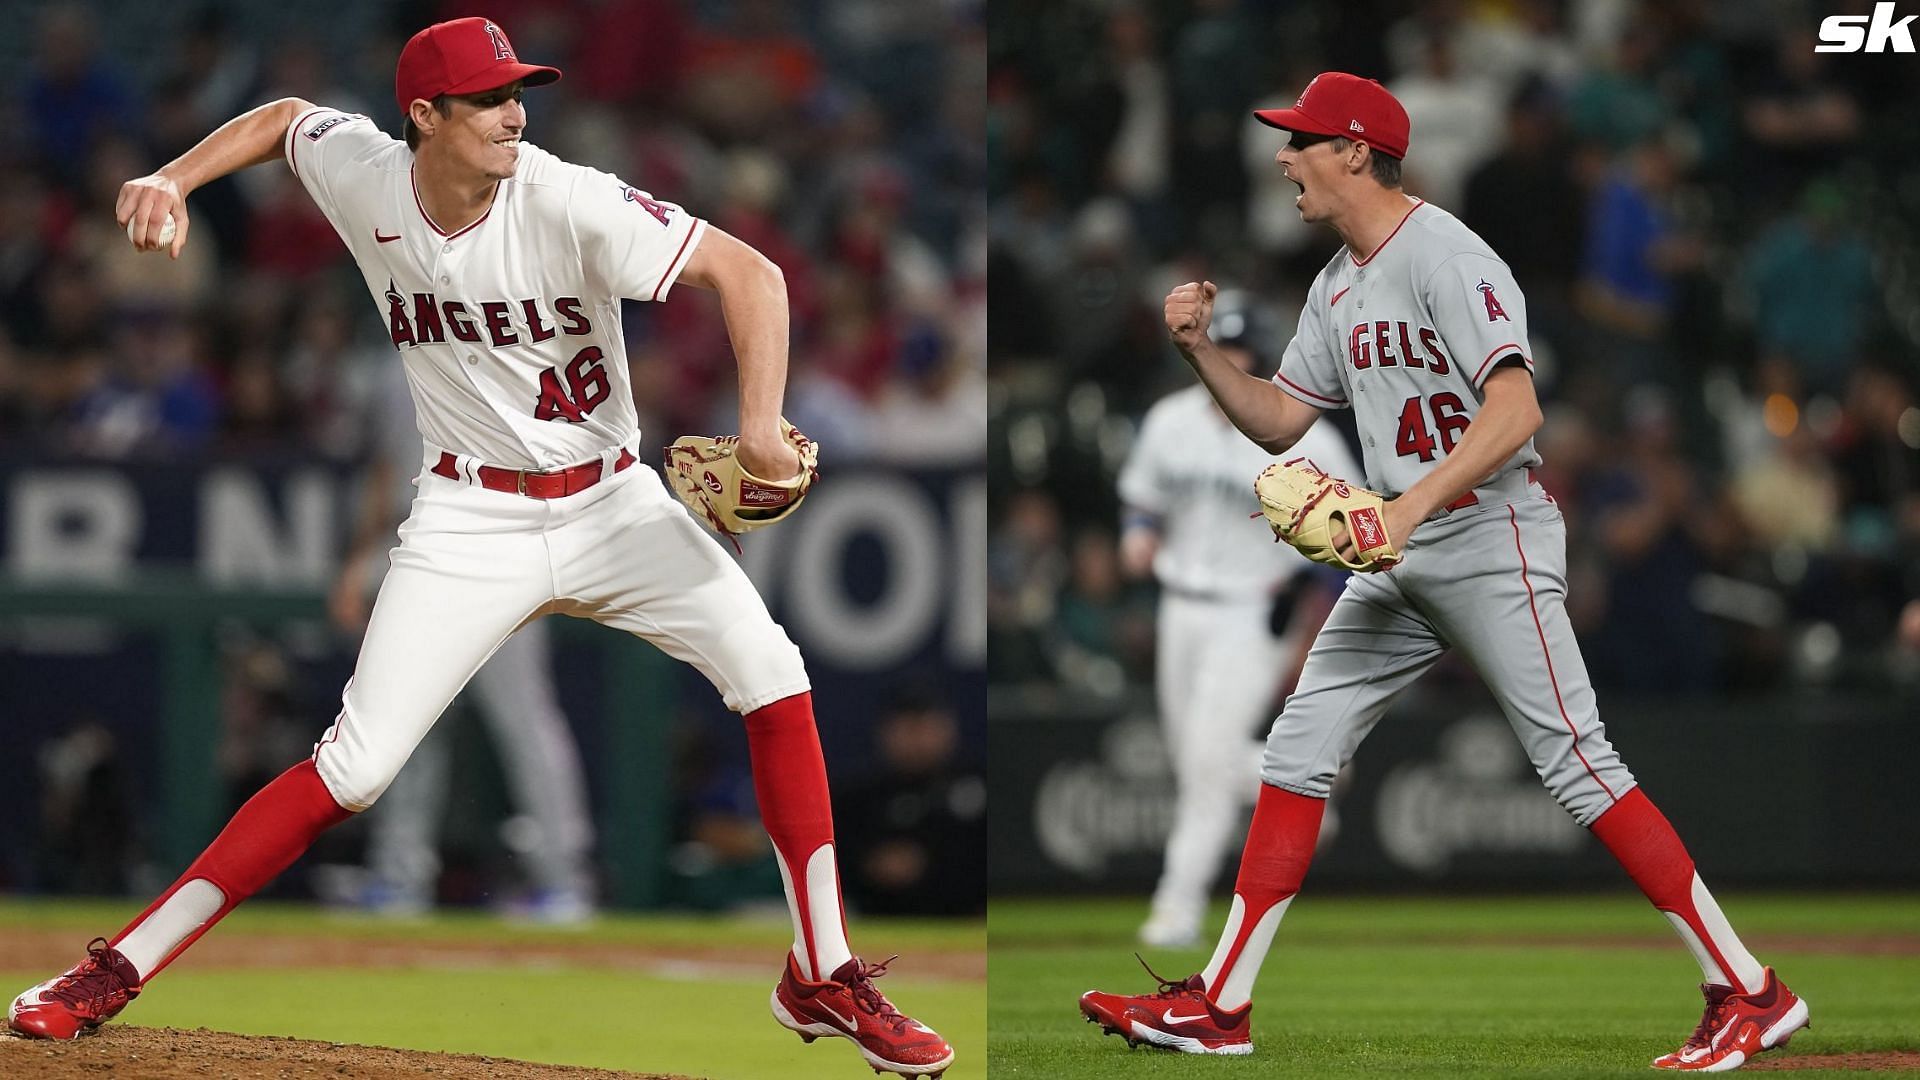 Jimmy Herget takes heat from Angels fans after conceding 3 back-to-back  homers against Rangers - "Never seen a more prime DFA candidate"